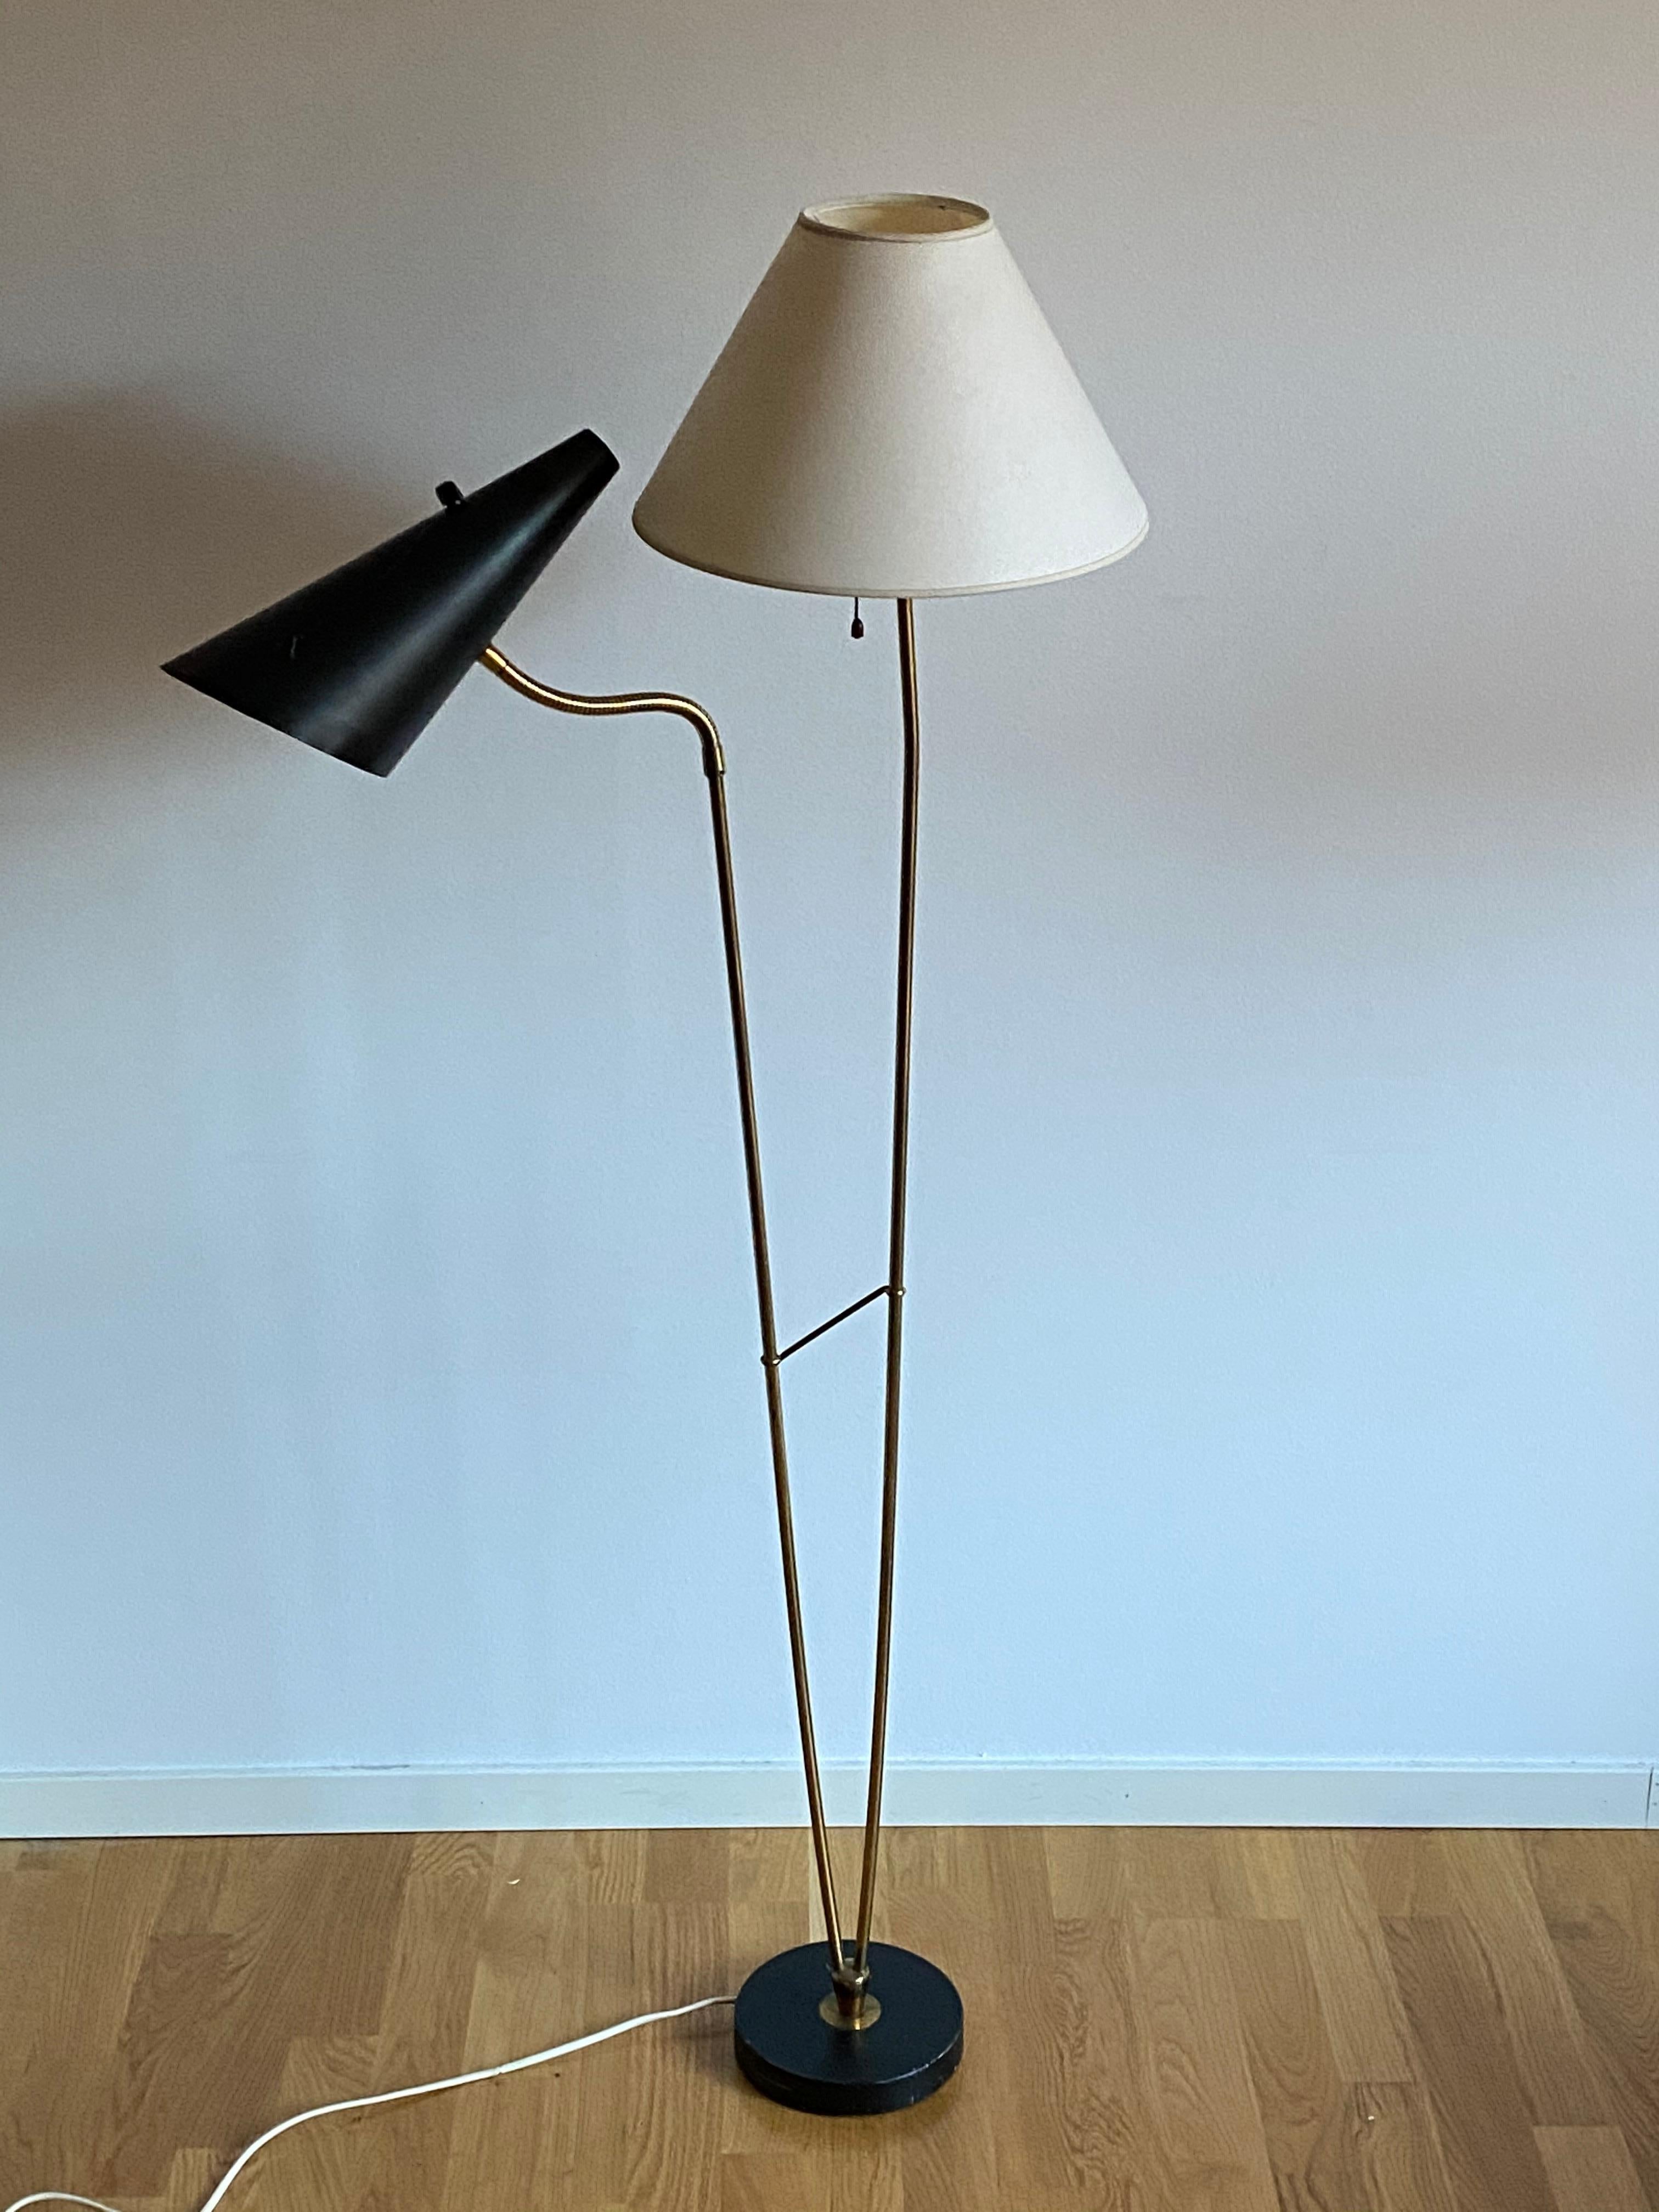 A floor lamp produced by Swedish firm AJH. Marked. One organic adjustable arm with reading light and one arm with a vintage fabric screen. 

Other designers of the period include Paavo Tynell, Hans Agne Jacobsen, Josef Frank, and Serge